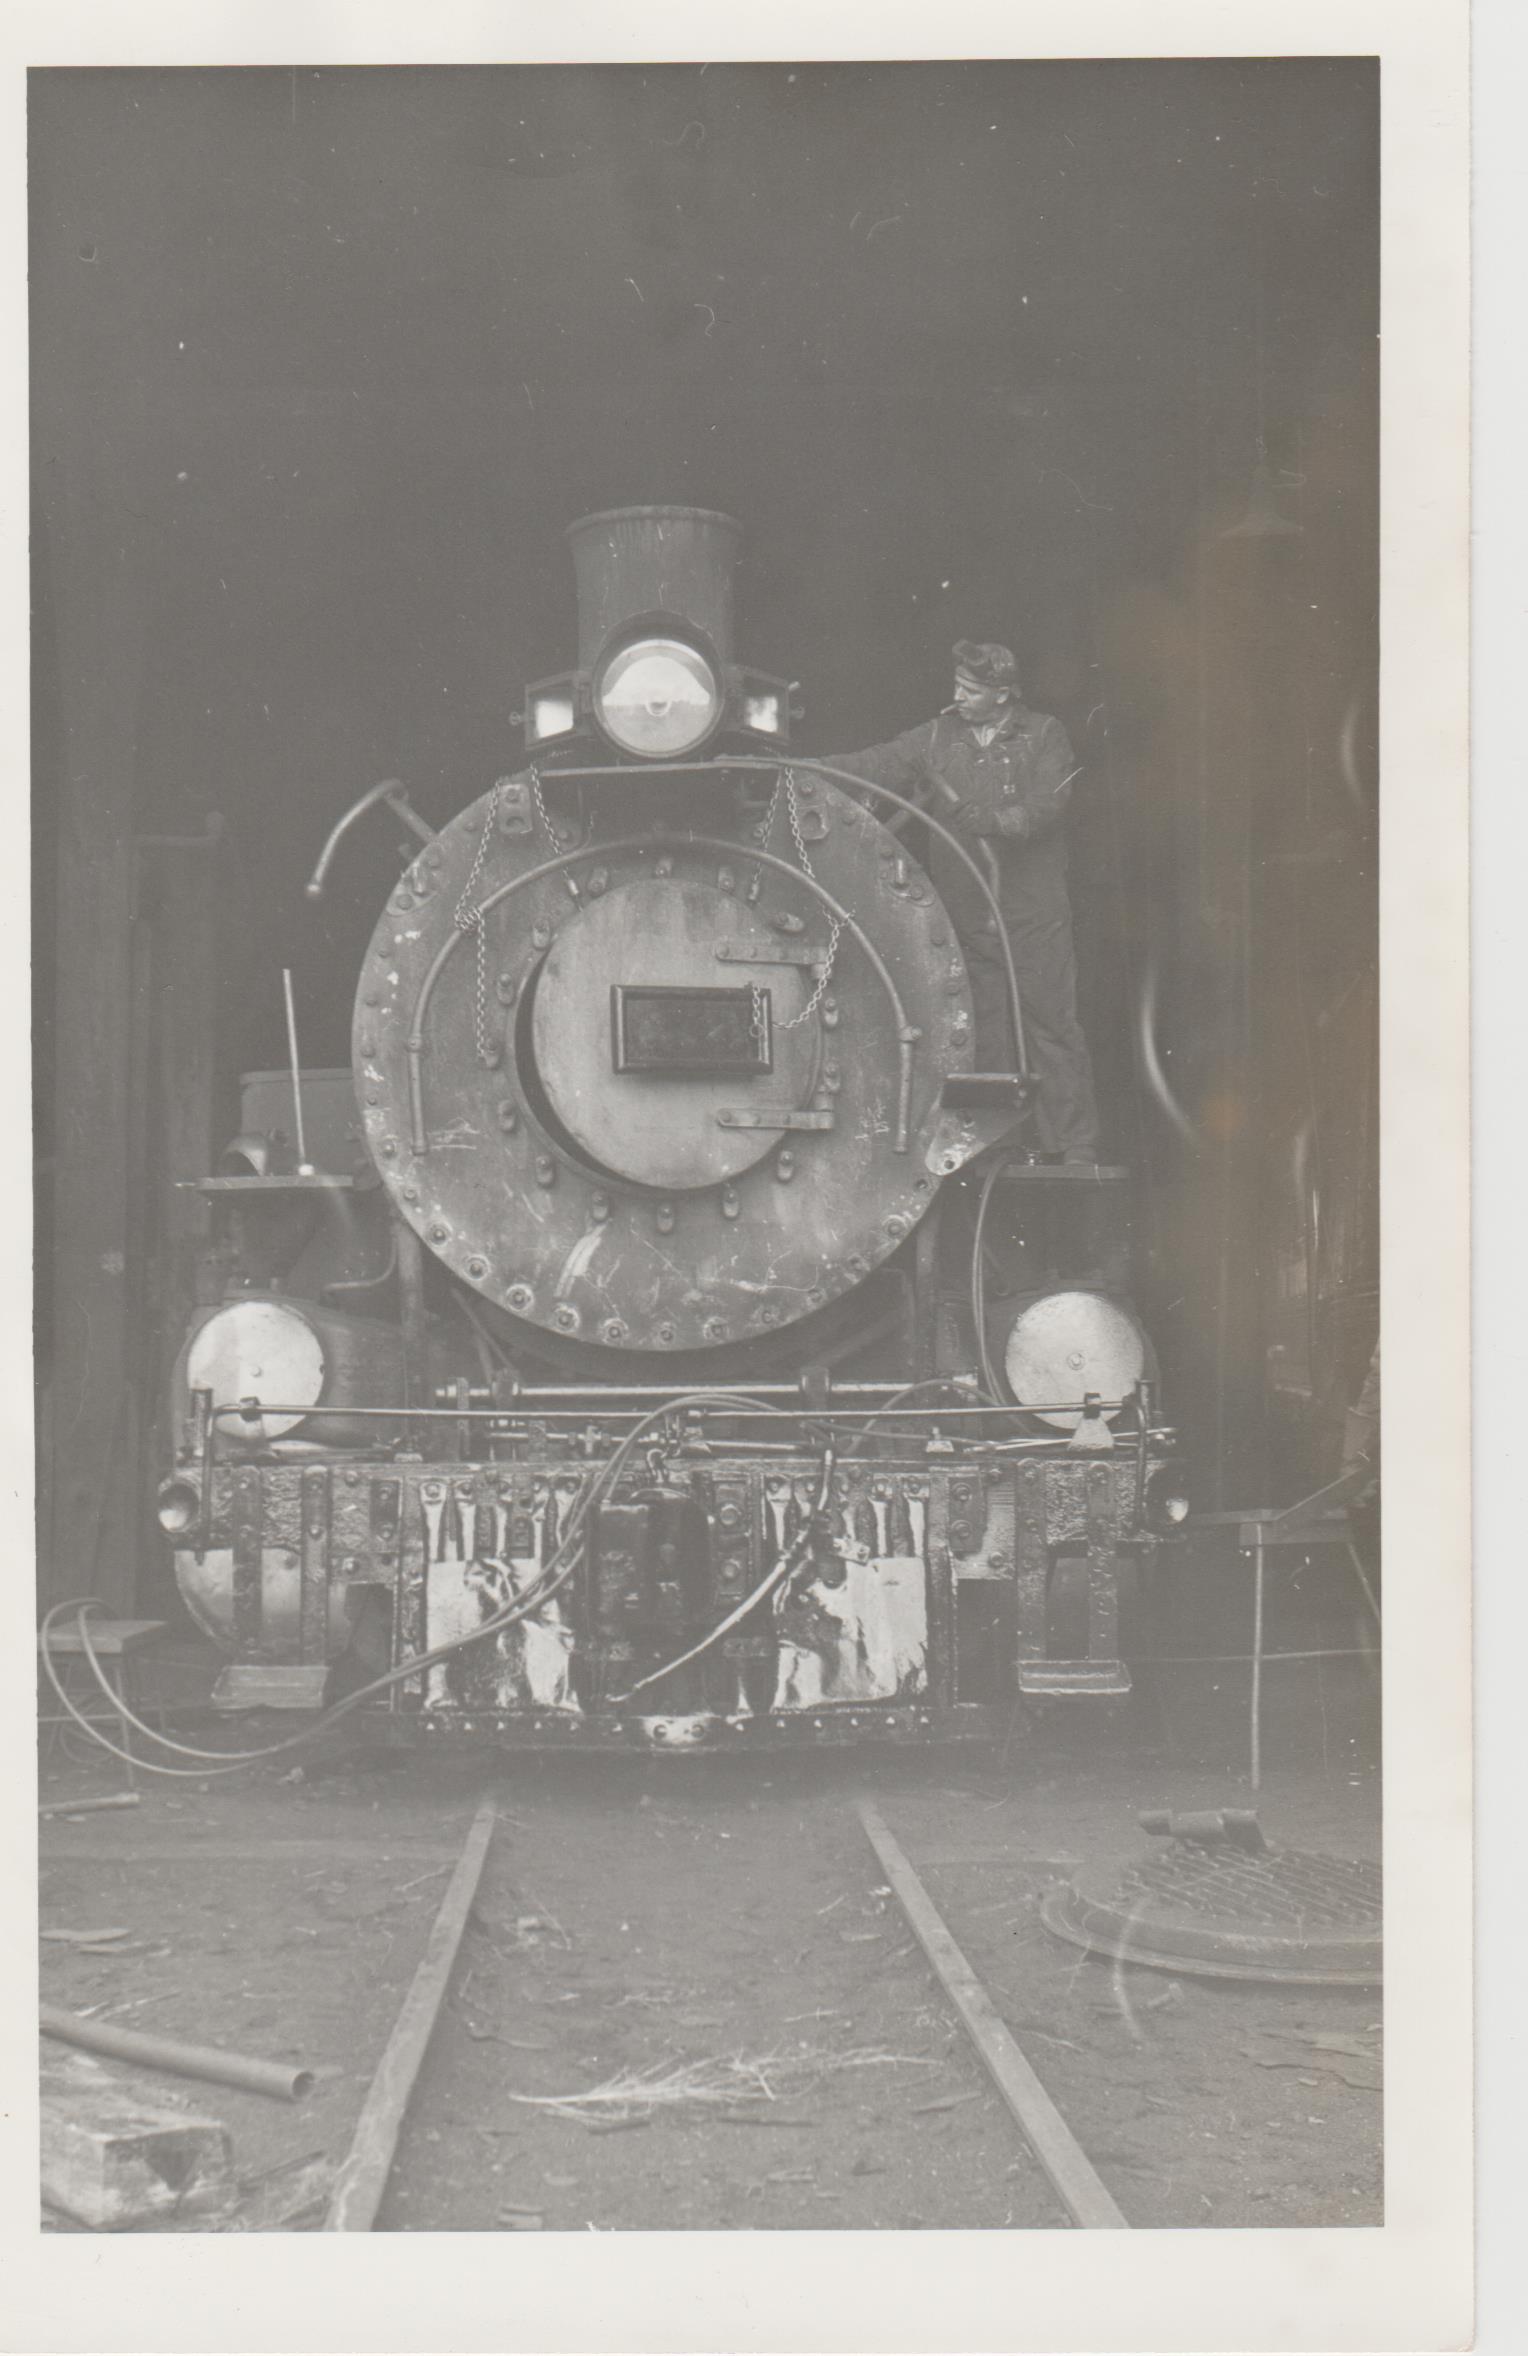 drgw  492 with 490 front aug 63 alamosa 001.jpg